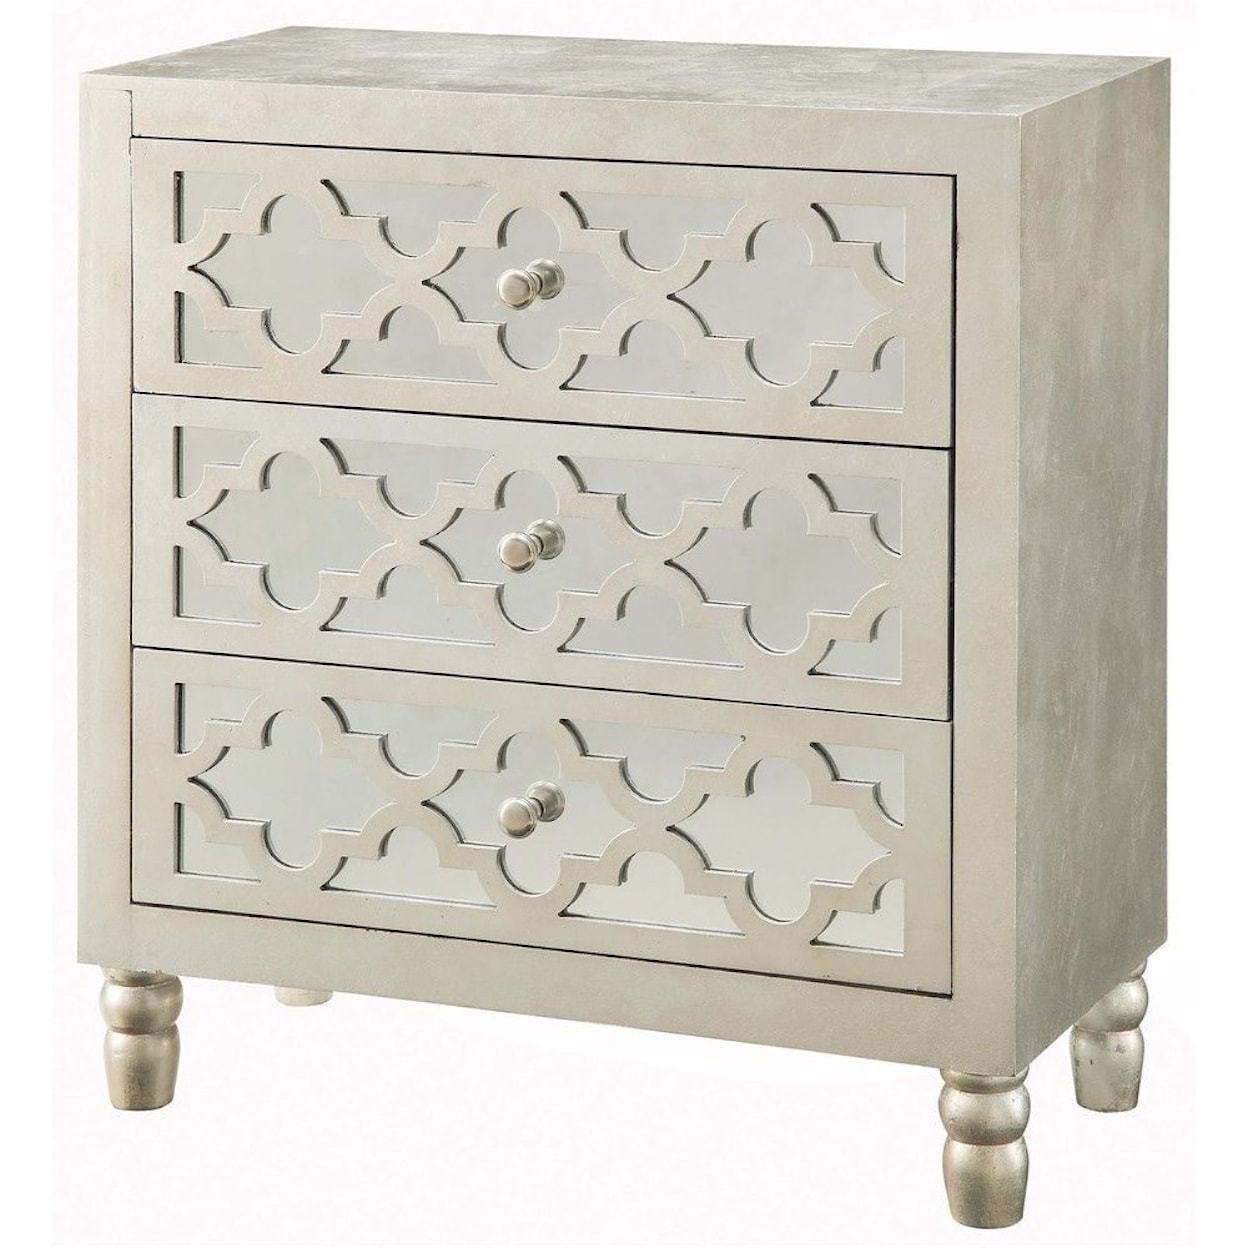 Crestview Collection Accent Furniture Newcastle 3 Drawer Silver Leaf Chest